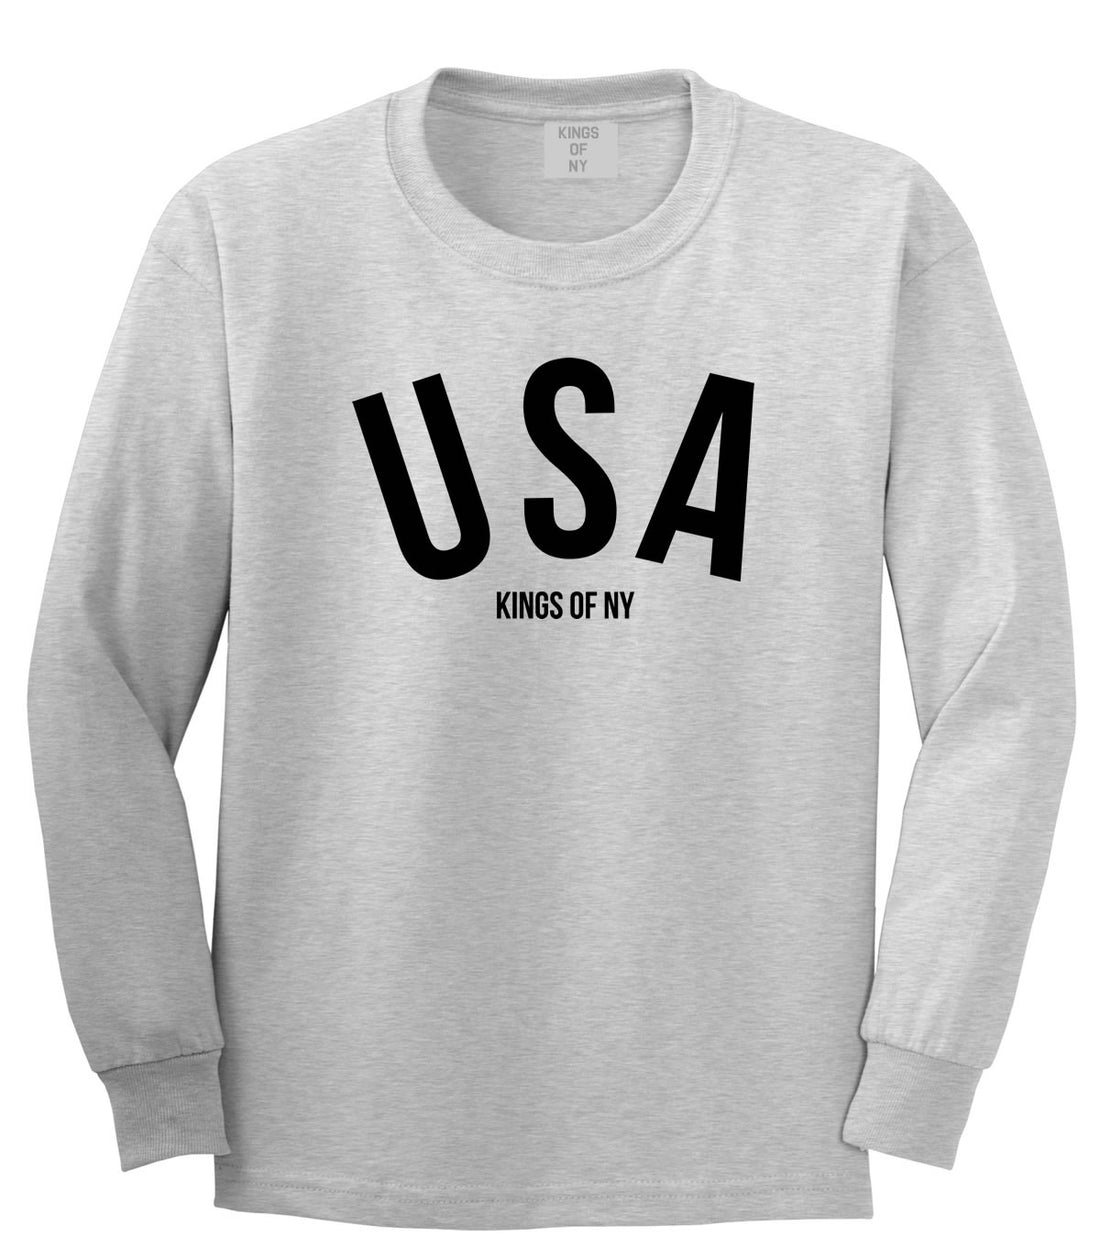 USA Long Sleeve T-Shirt in Grey by Kings Of NY